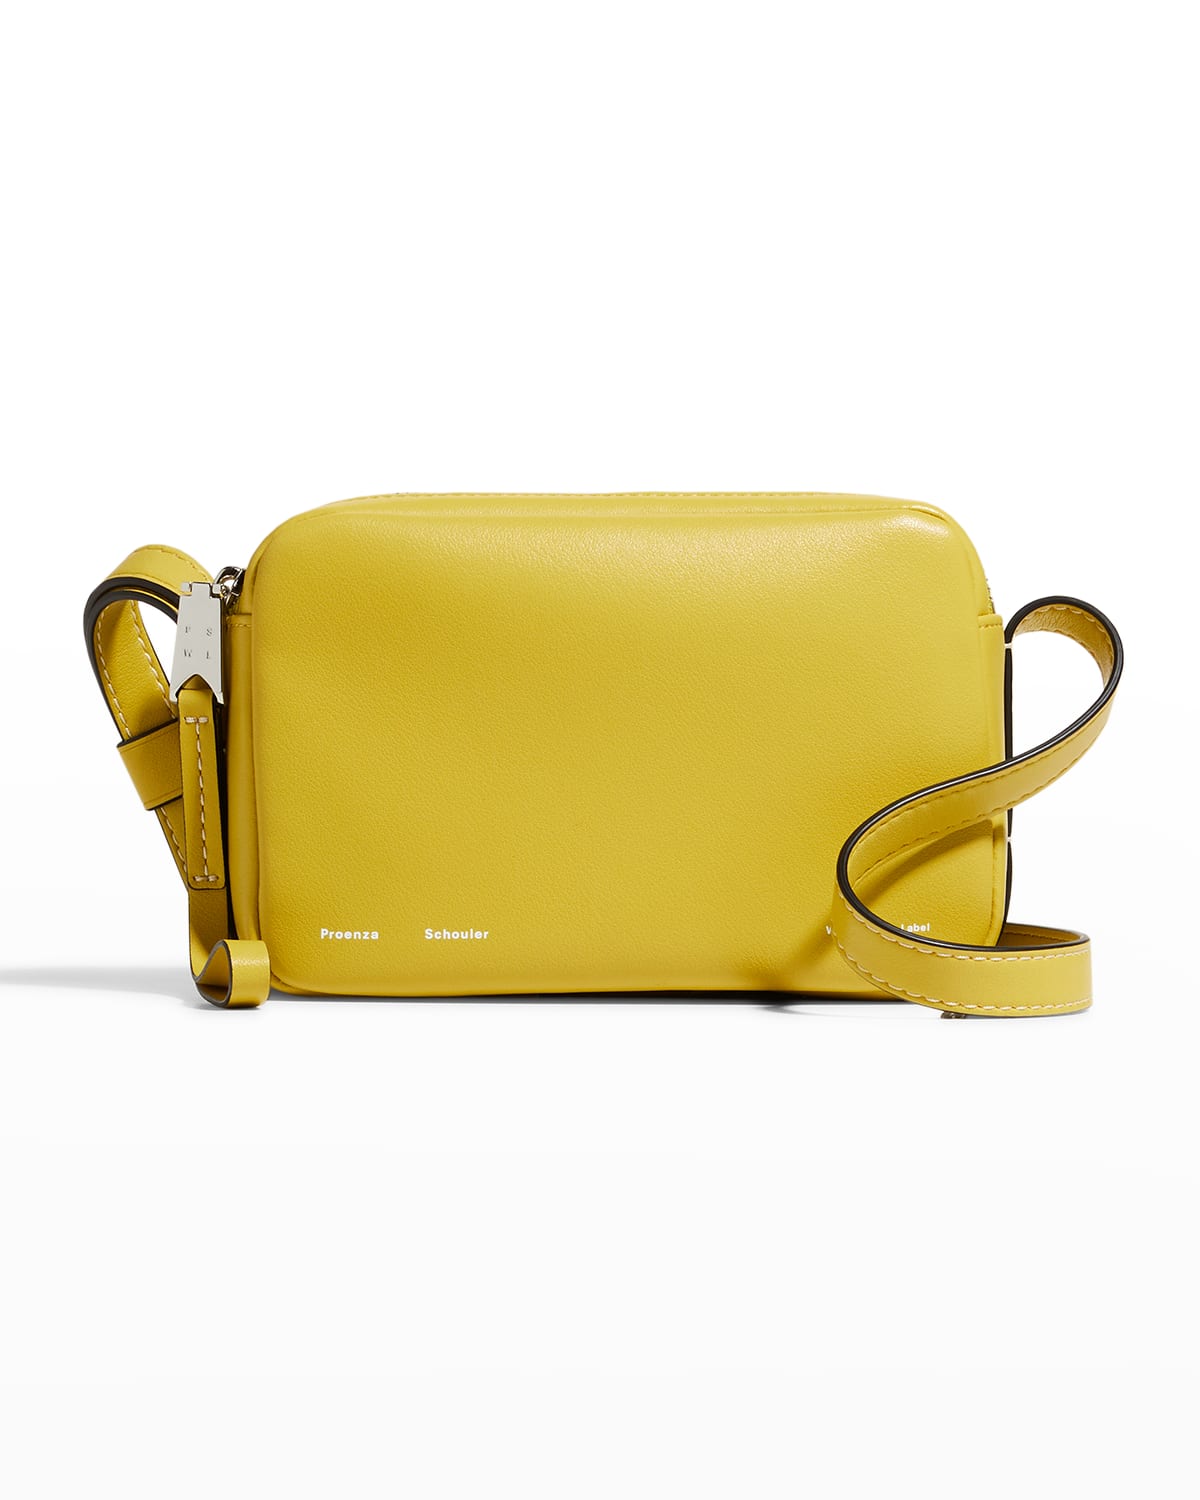 Proenza Schouler White Label Watts Leather Camera Shoulder Bag In Chartreuse